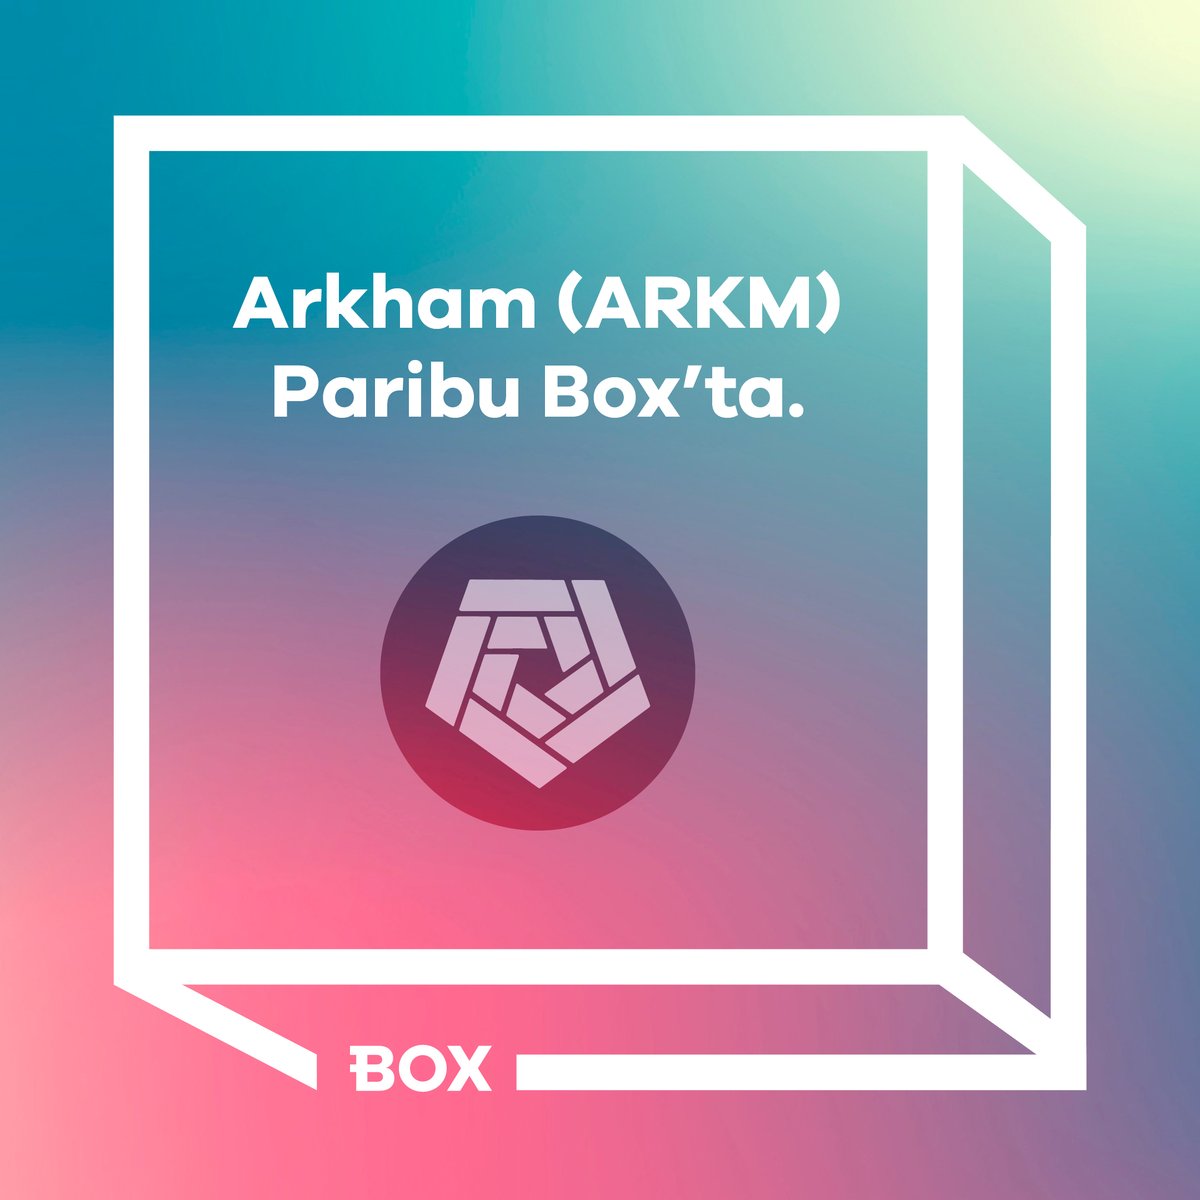 #Paribu New Listing
Arkham (ARKM) deposit transactions have started at Paribu Box. You can carry out your trading transactions as of 16.00 today. 
To get detailed information about Paribu Box⬇️
paribu.com/blog/haberler/… 

Link: x.com/Pari...